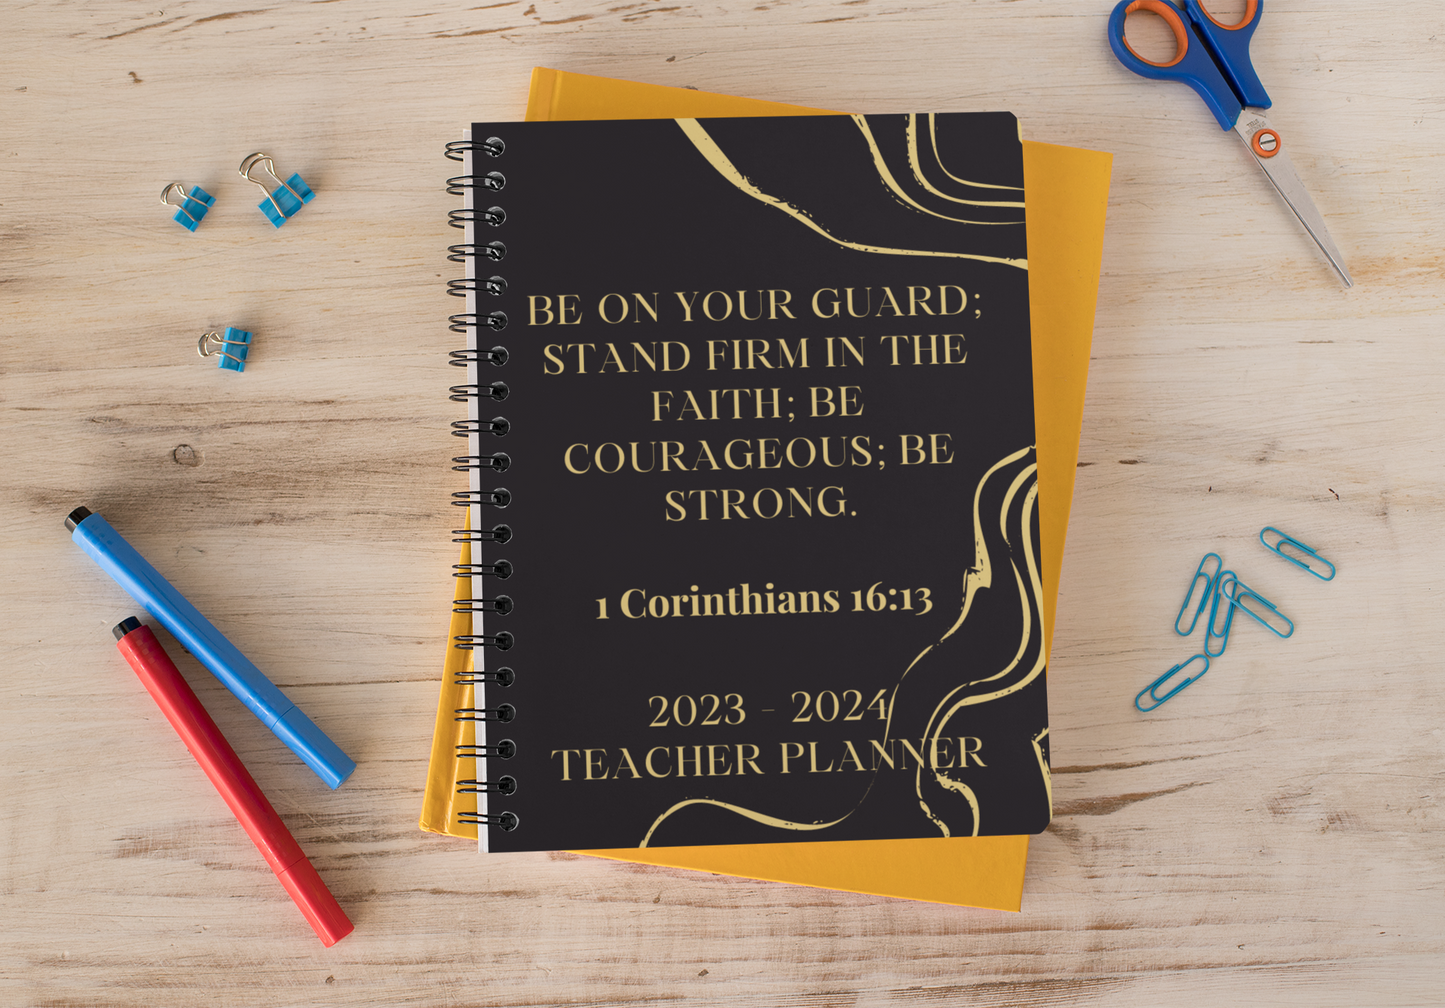 Teacher Planner - Be On Your Guard; Stand Firm In The Faith; Be Courageous; Be Strong